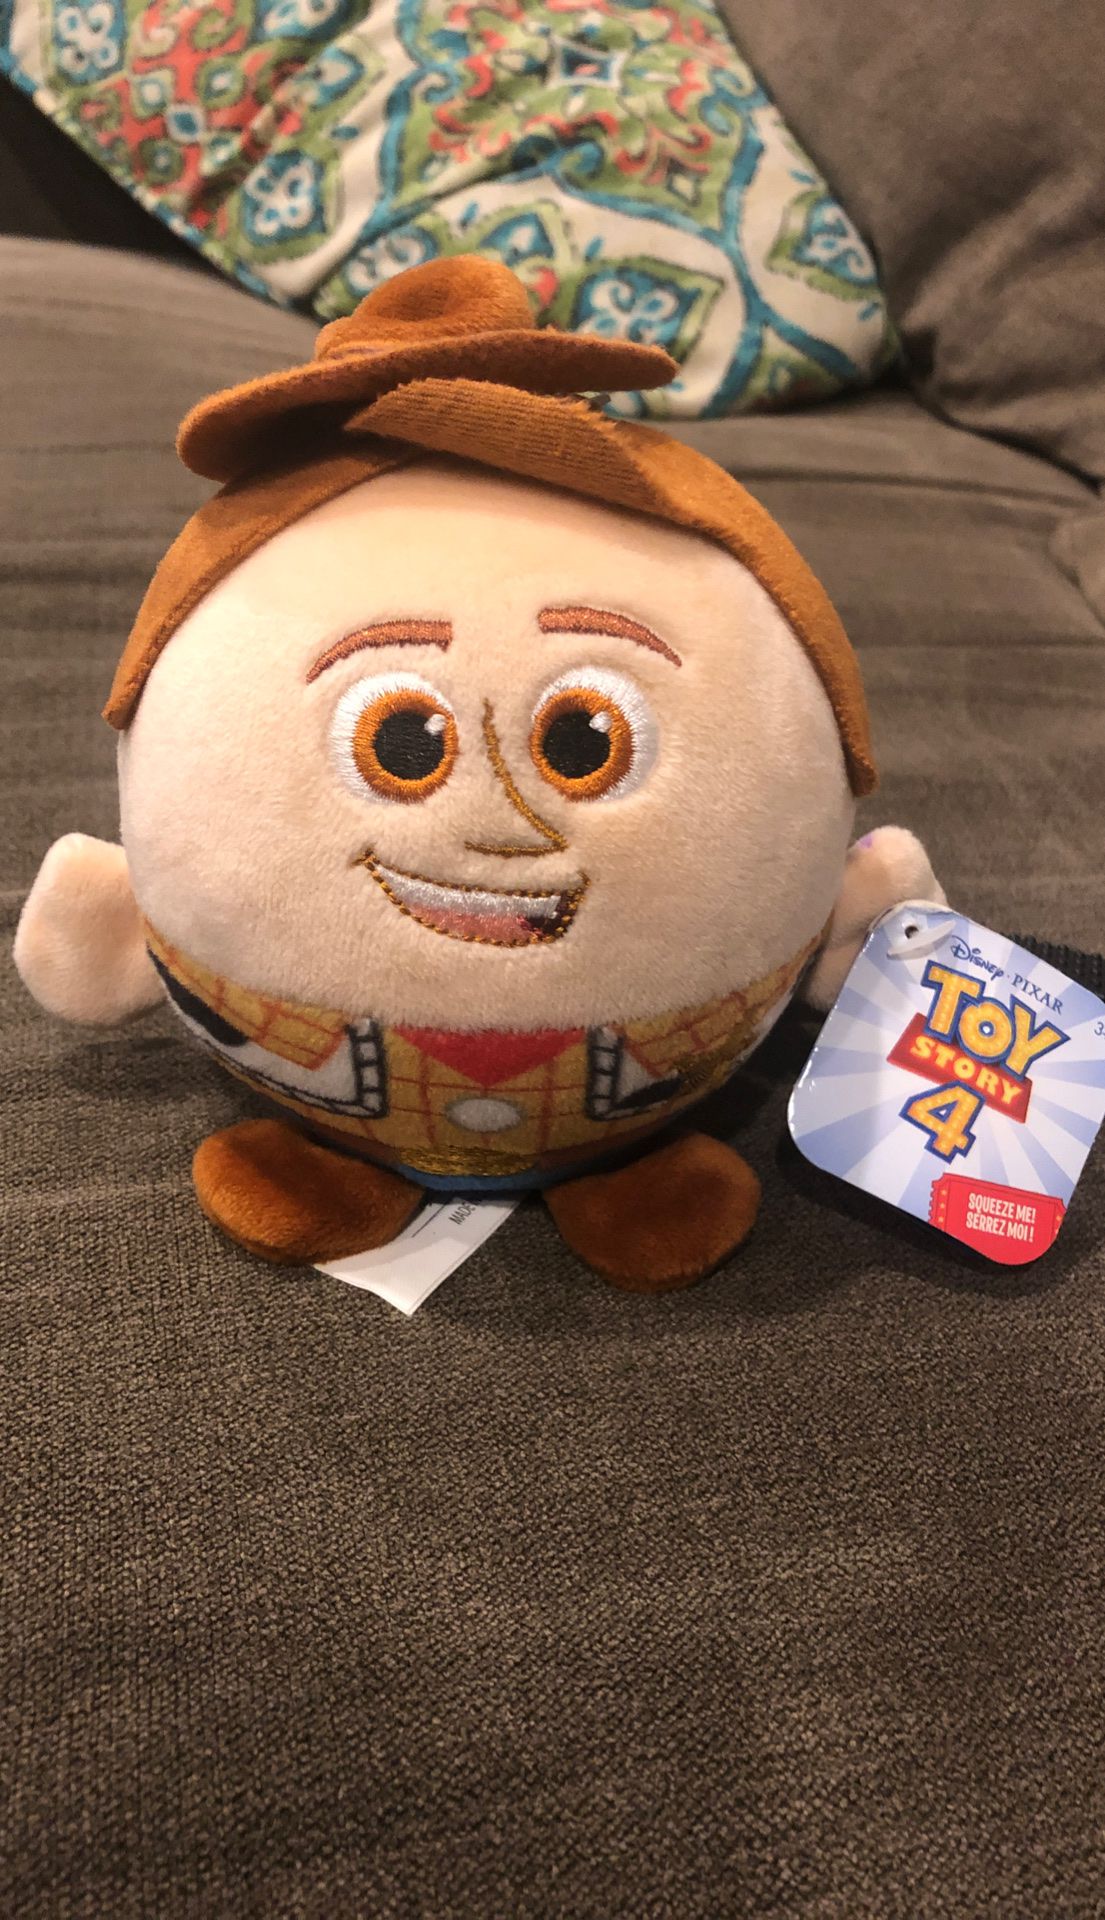 Toy story 4 Fat Squeeze me !